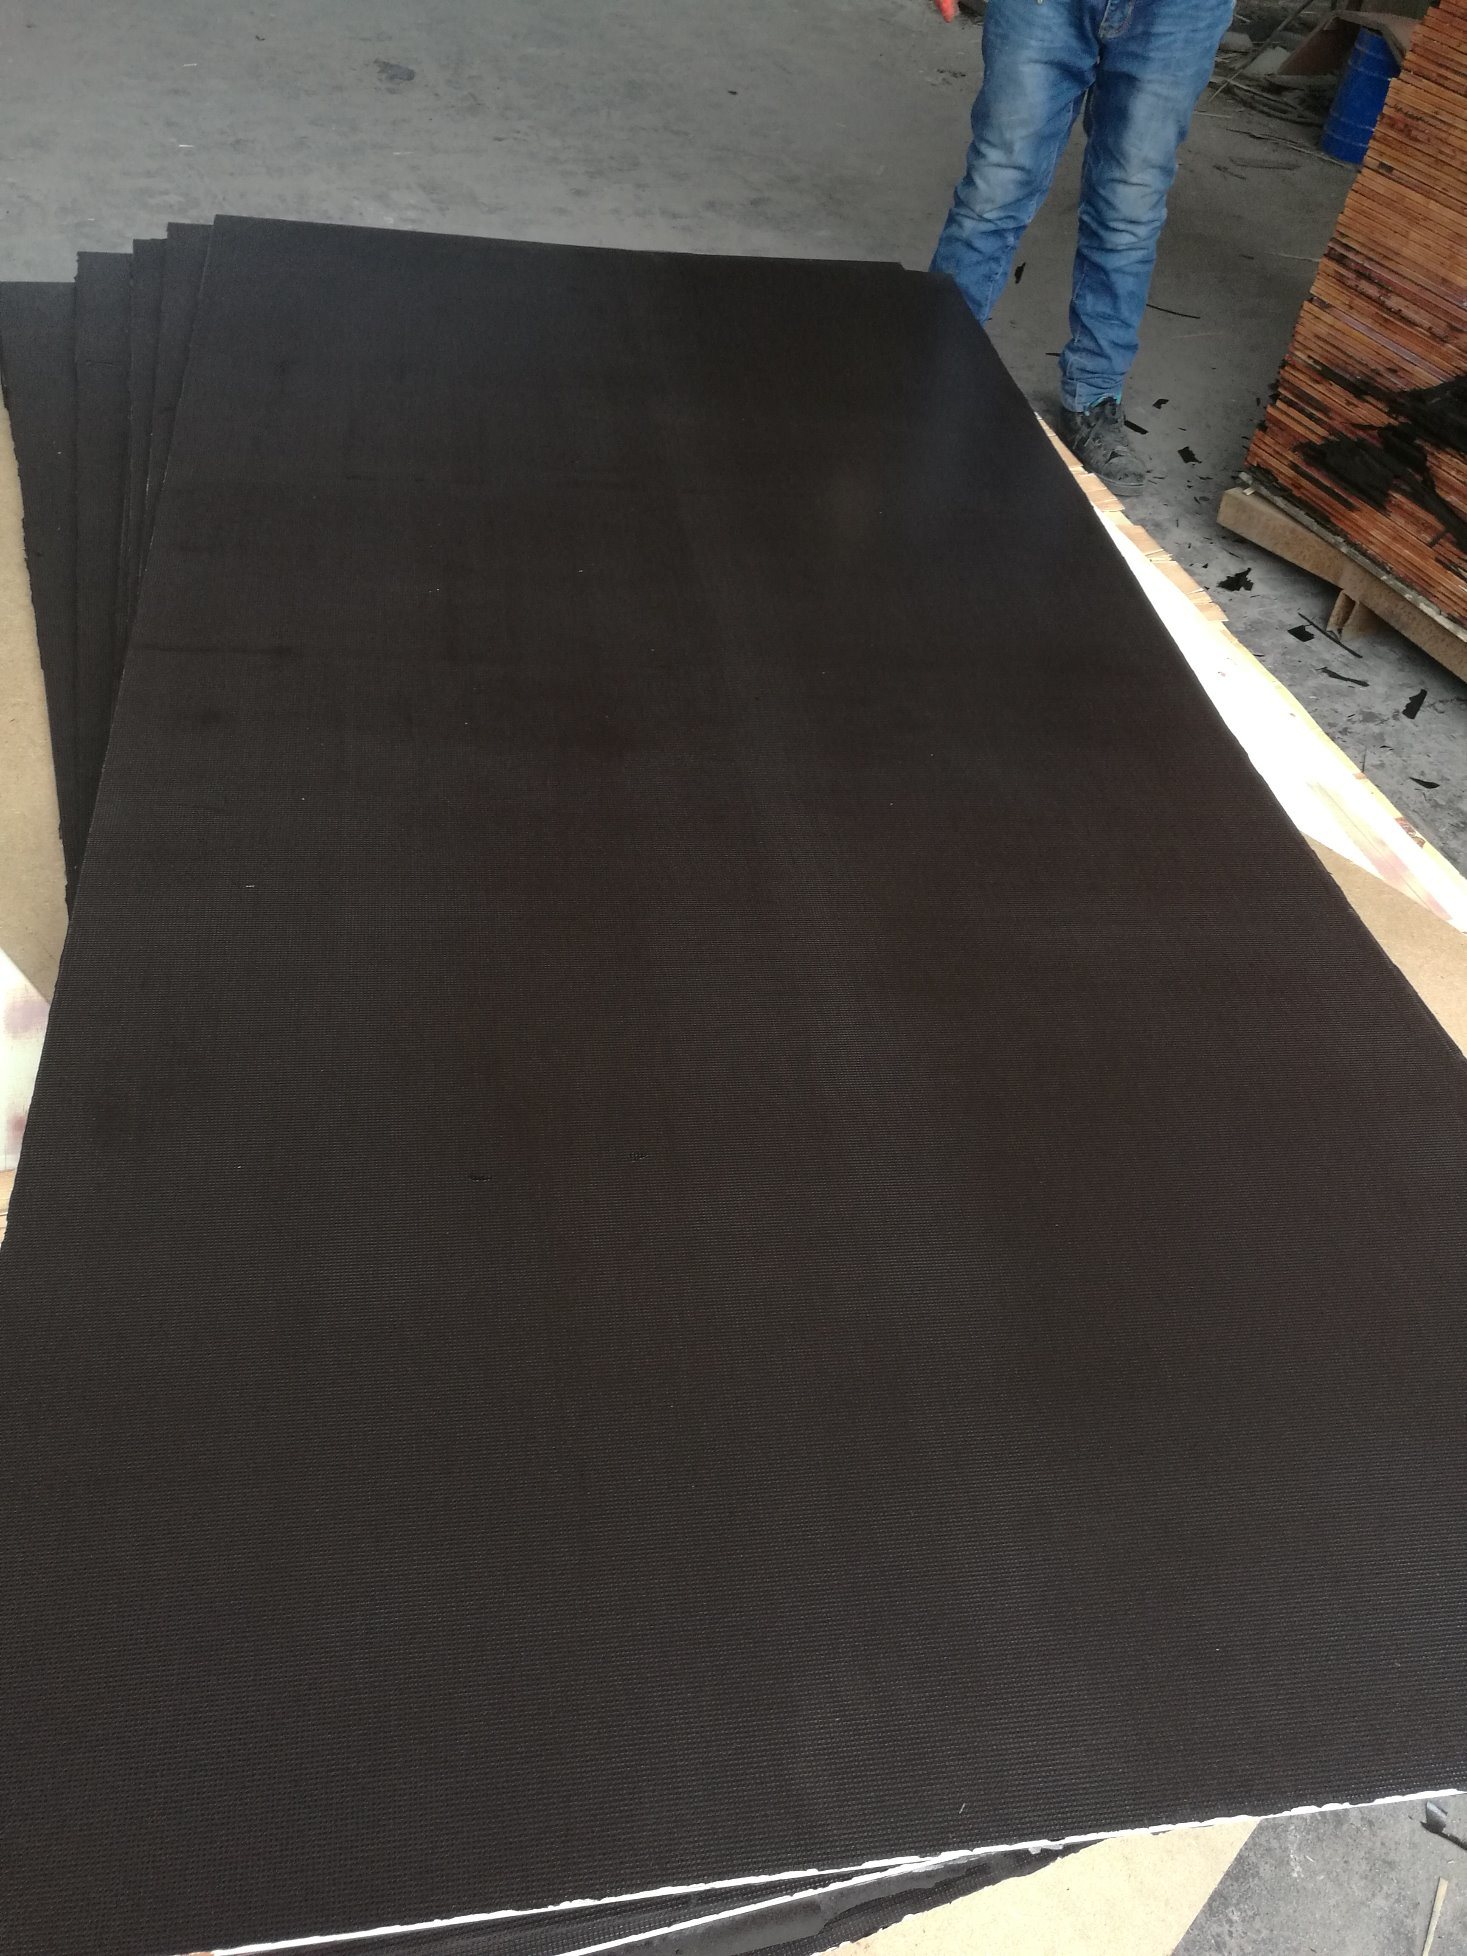 Black/Brown/Anti-Slip Film Faced Plywood /Marine Plywood for Construction (HB002)